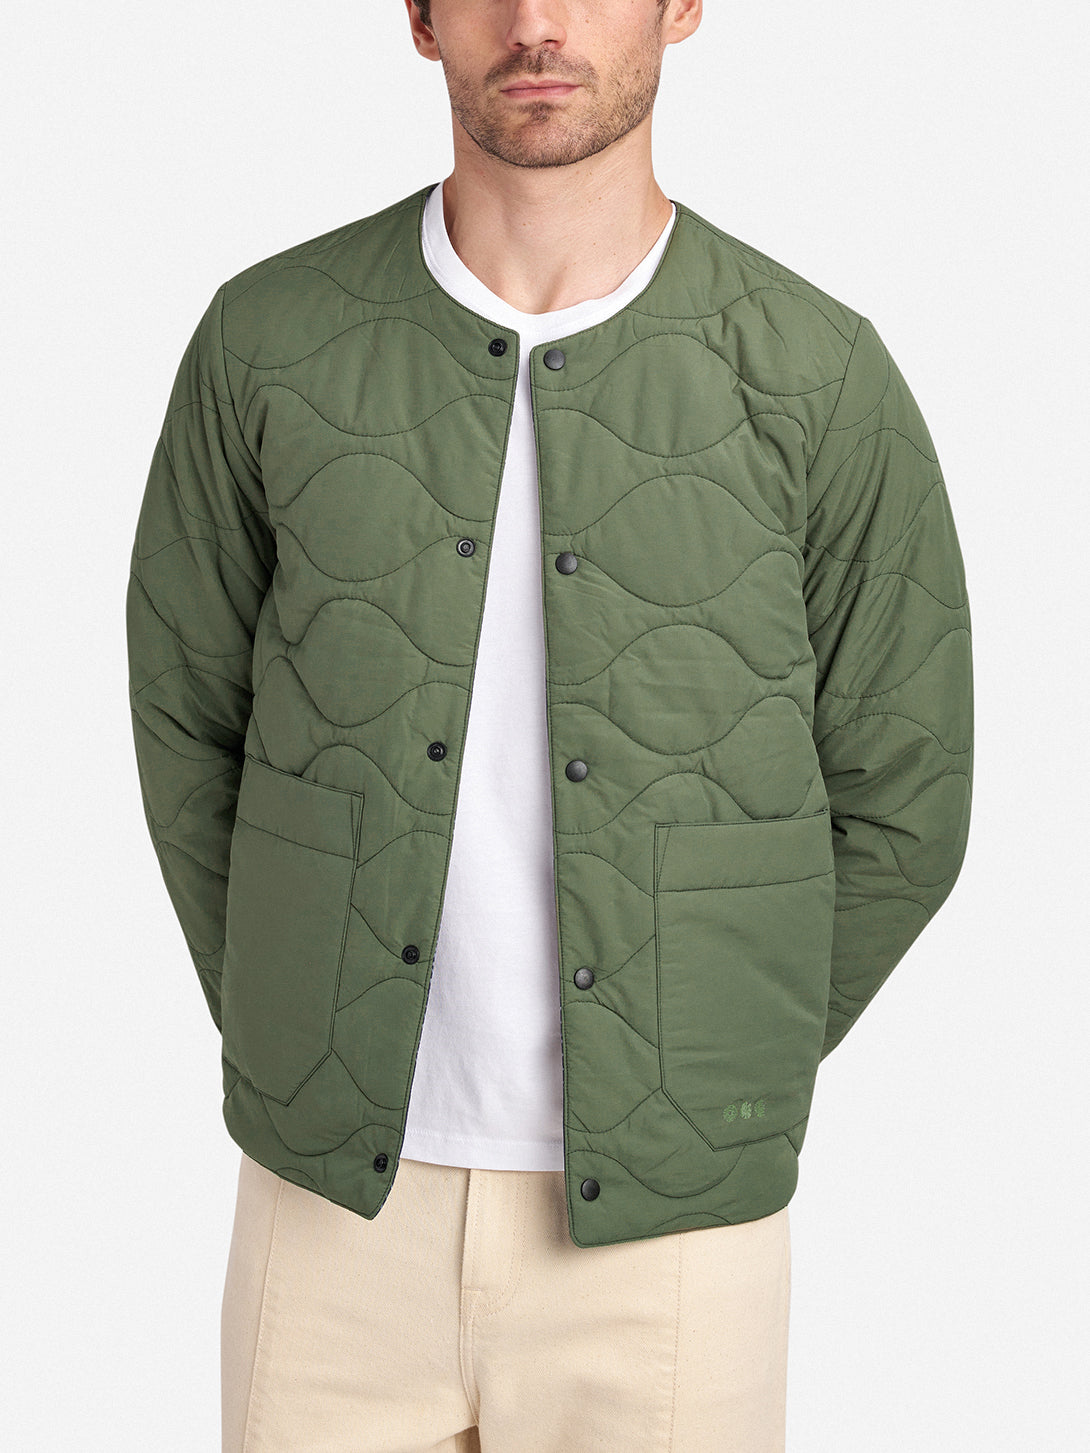 Layering with a green jacket for Fall